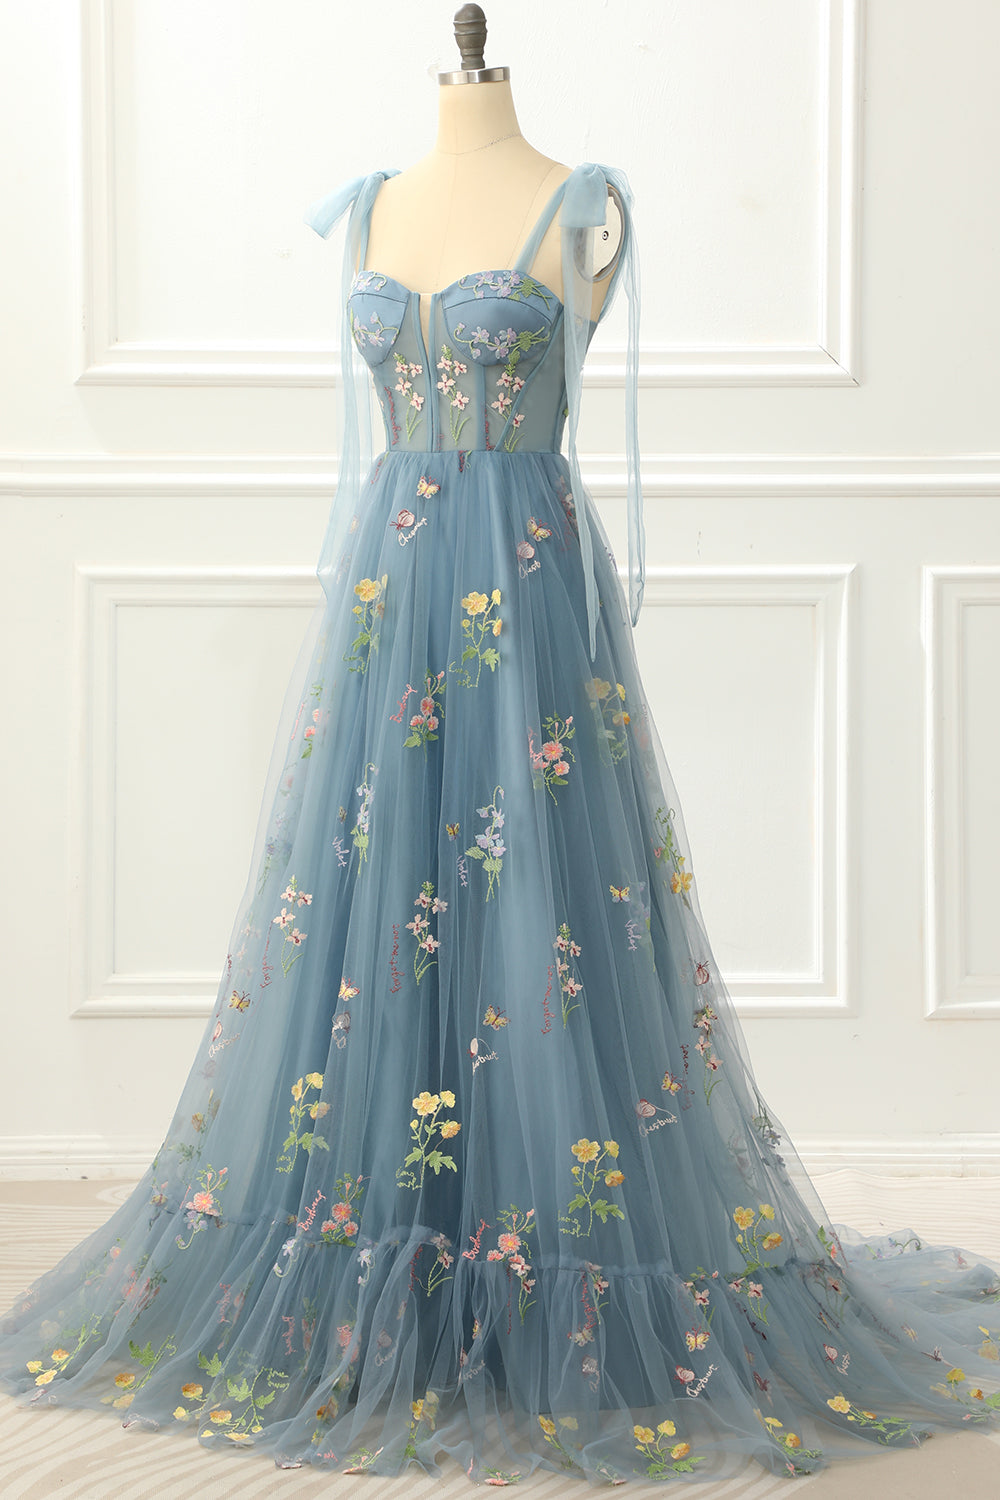 Homecoming Dress Pretty, A-Line Grey Blue Princess Prom Dress With Embroidery